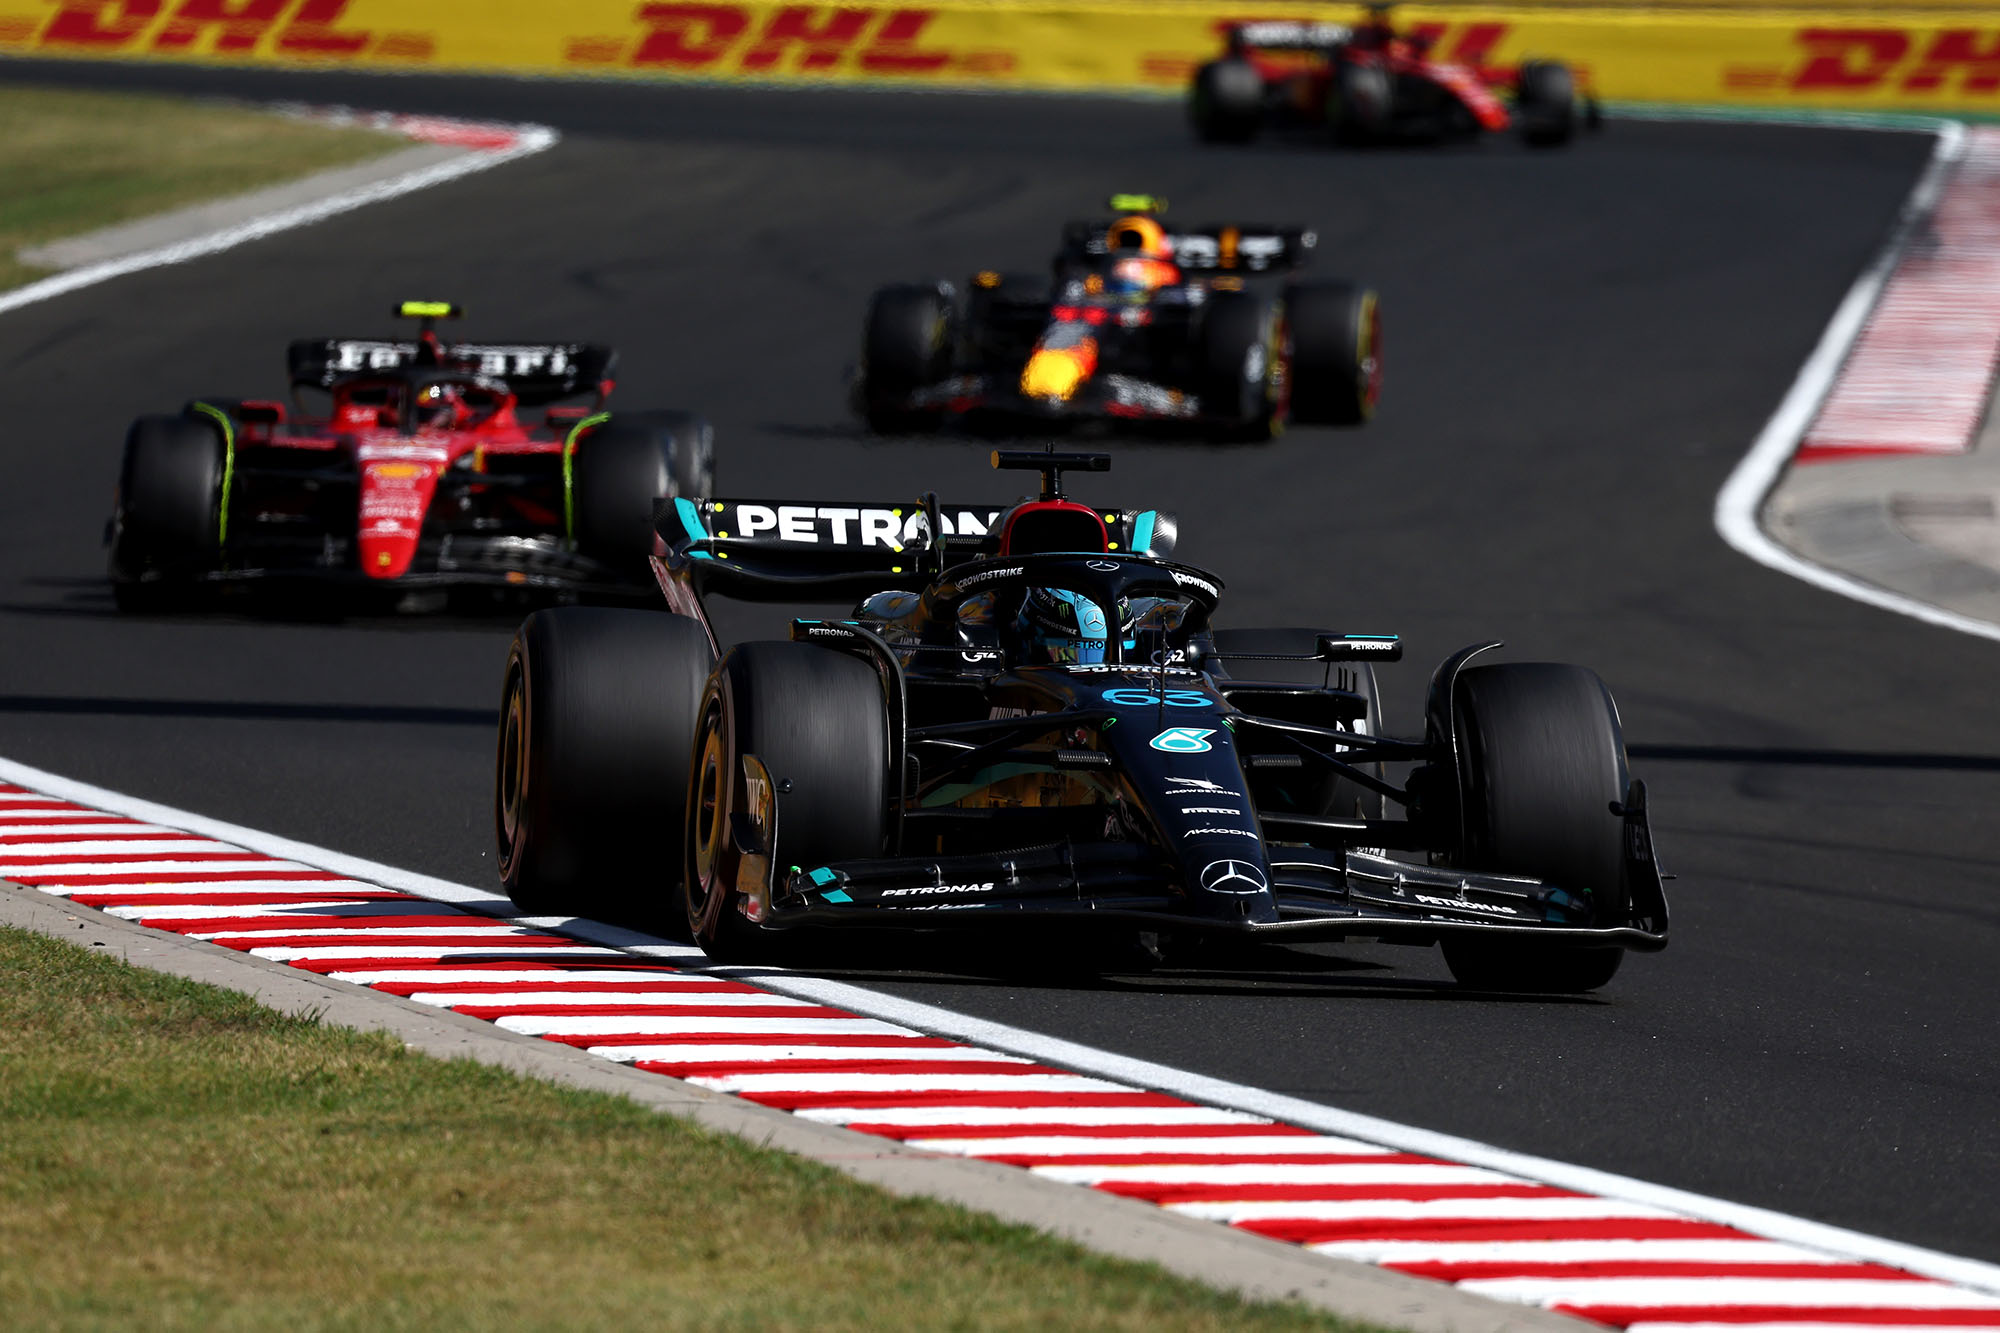 fia plans 2025 f1 changes to help overtaking – will it work?